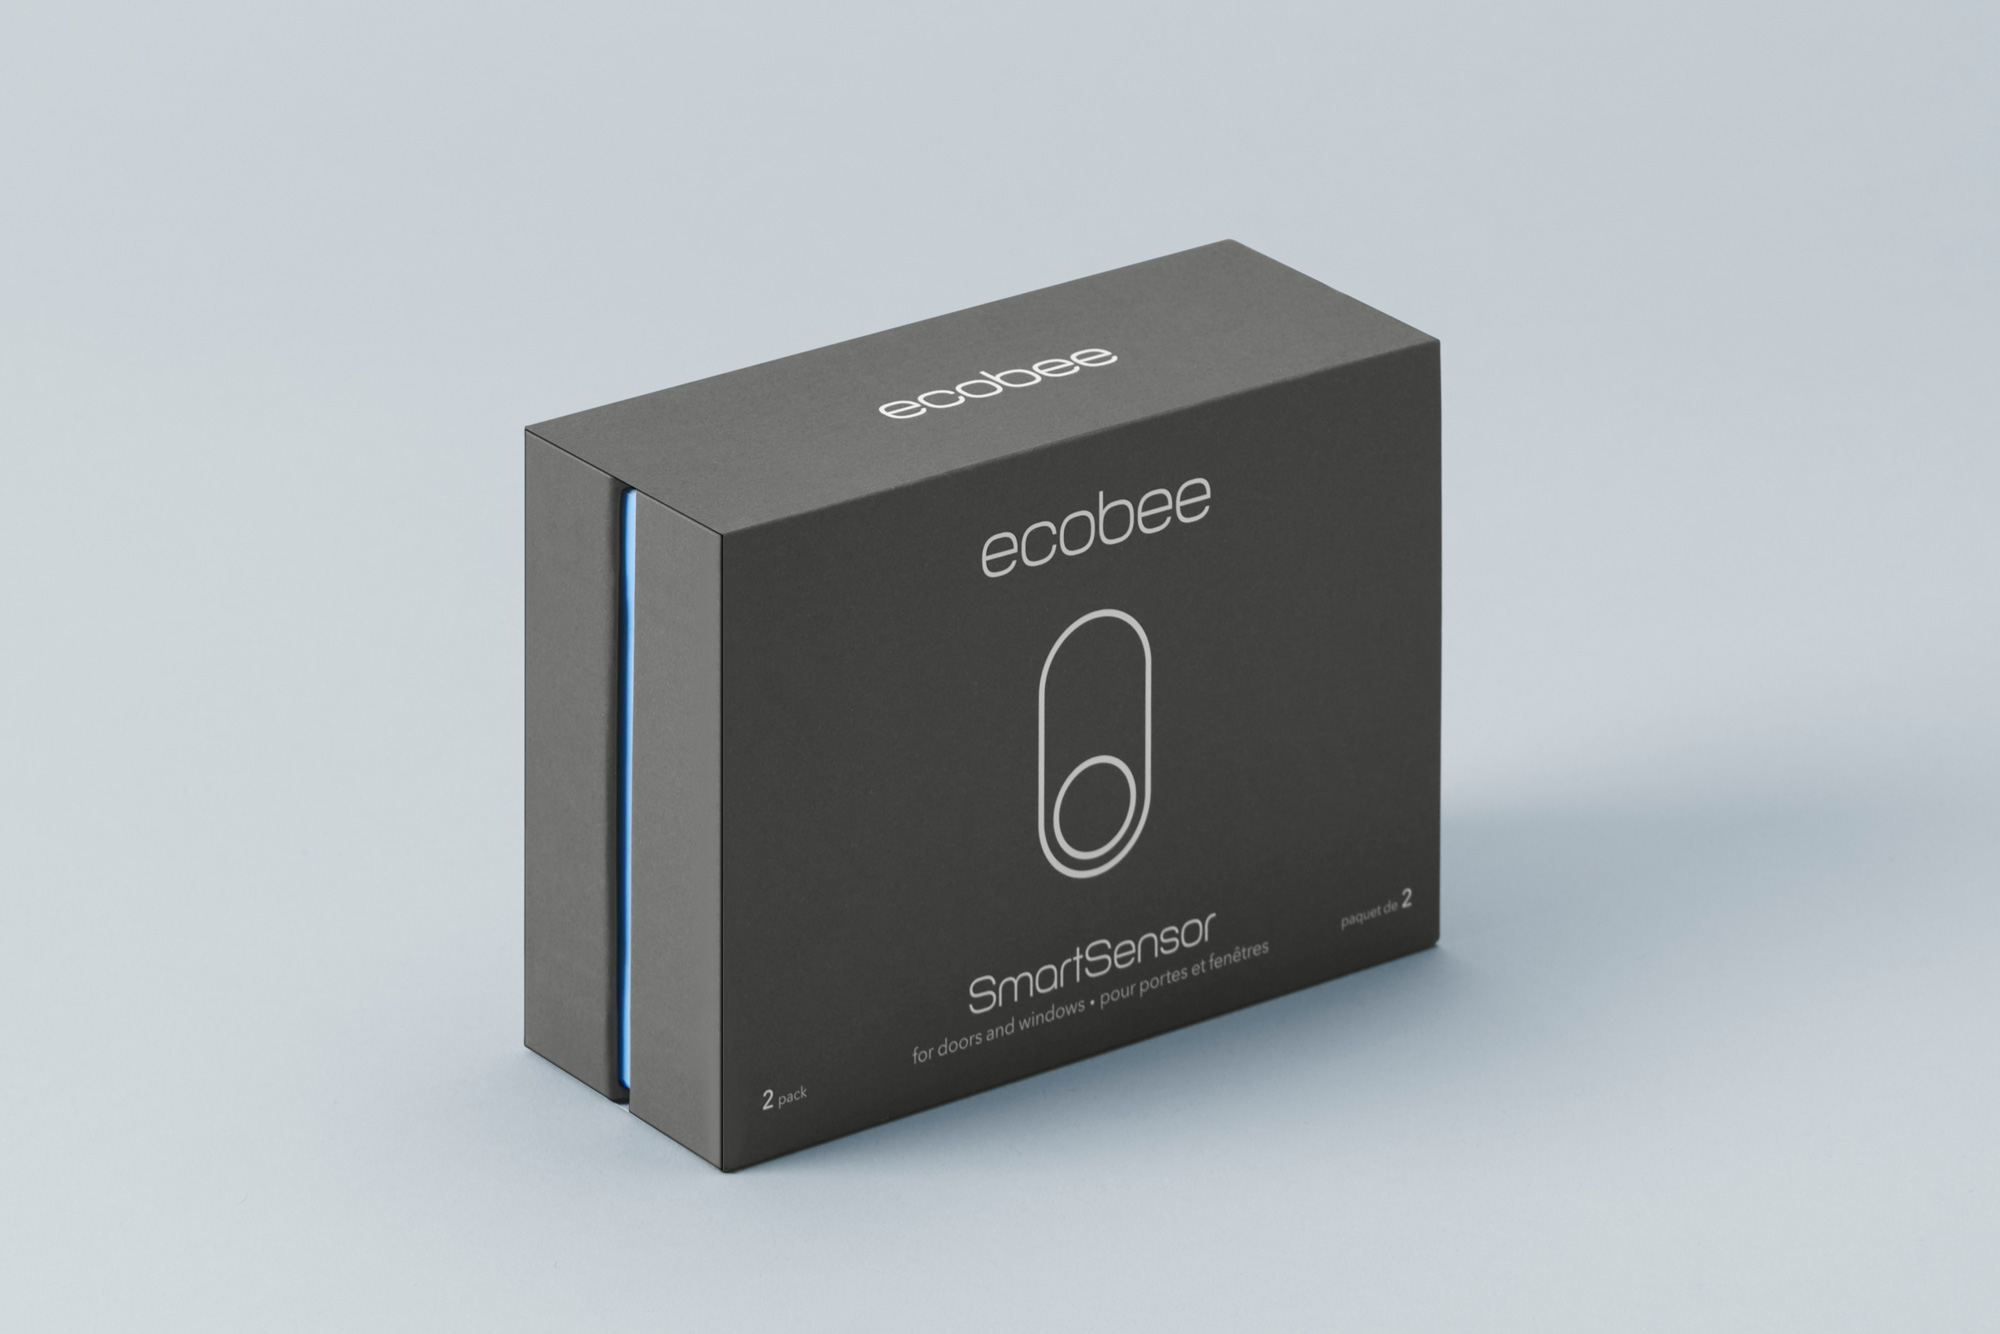 New Logo and Identity for ecobee